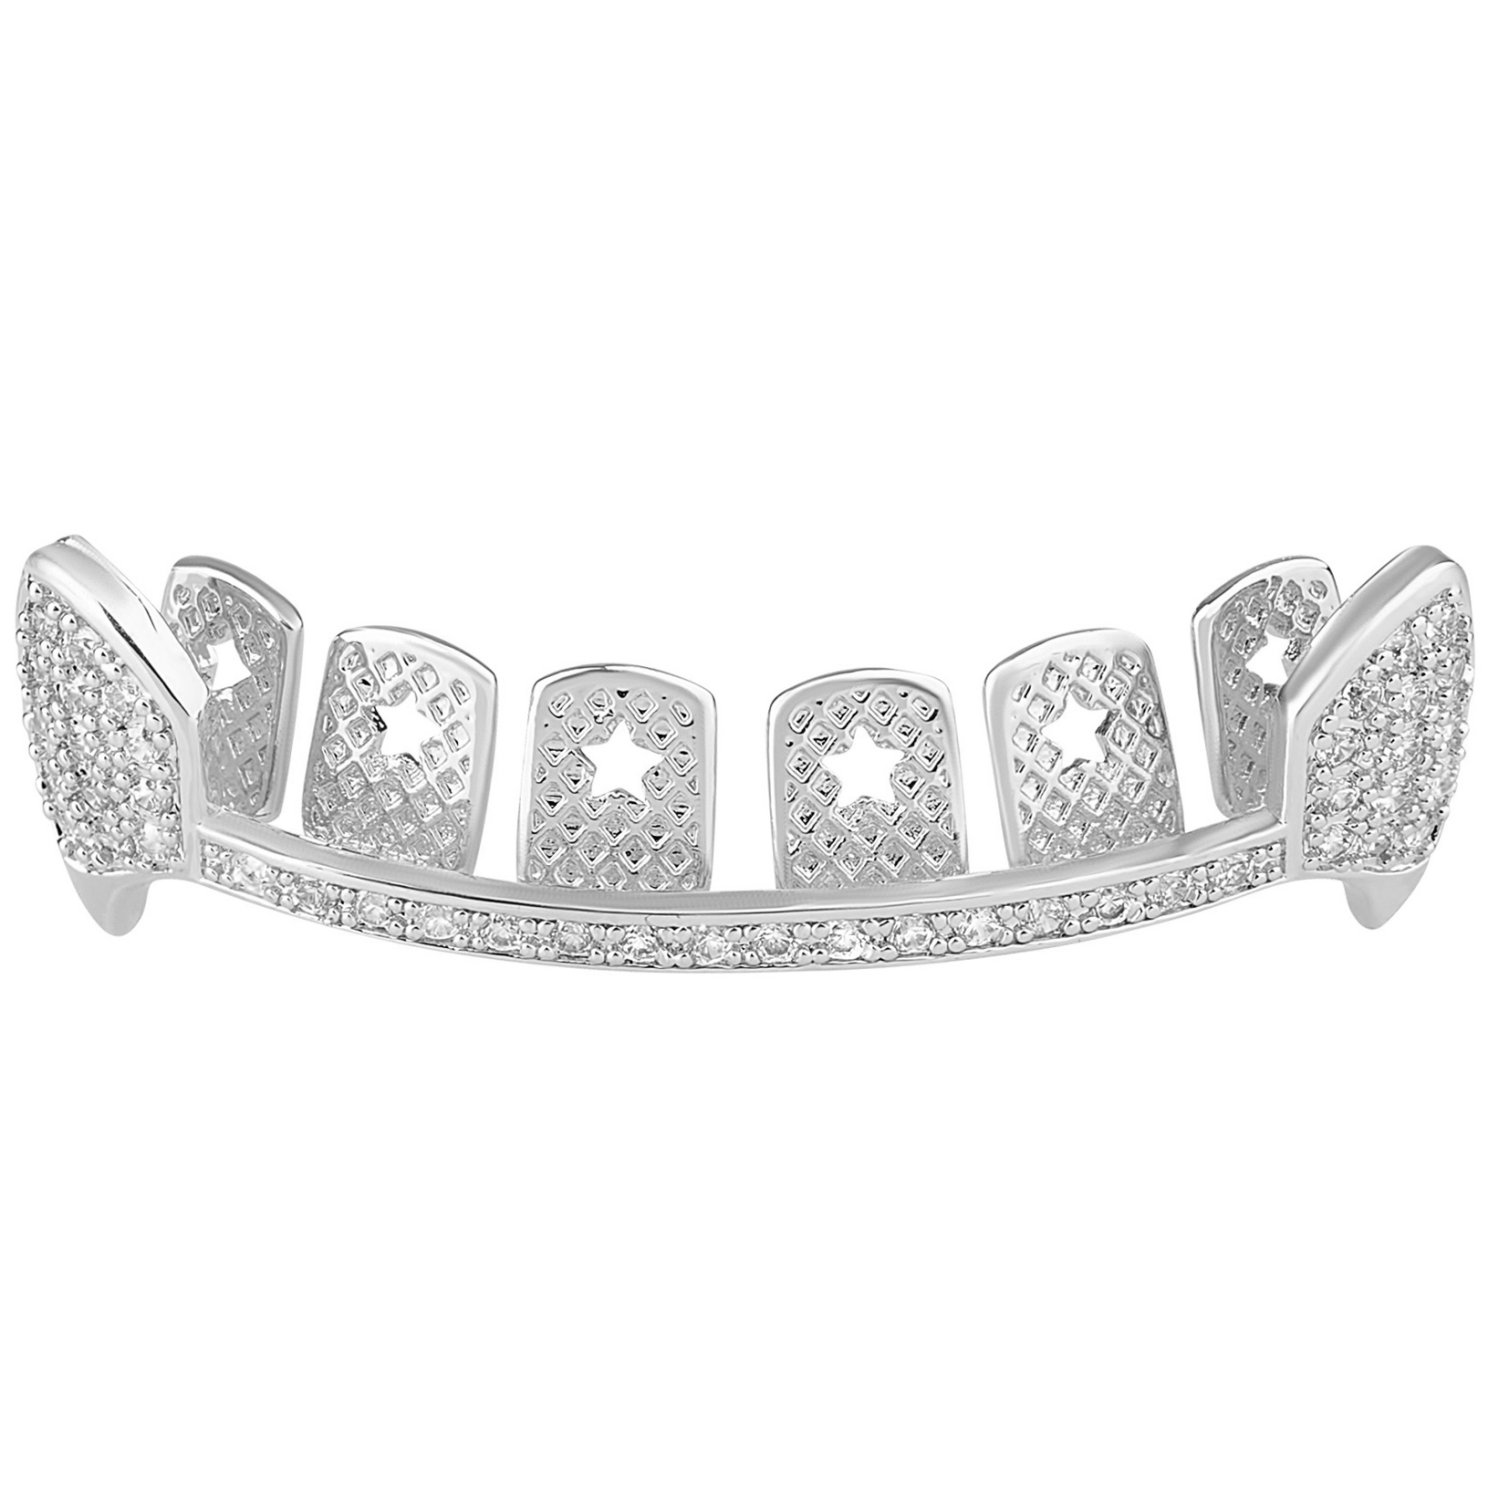 Vampire Zirconia Top Silver Iced Out Grillz One Size fits All